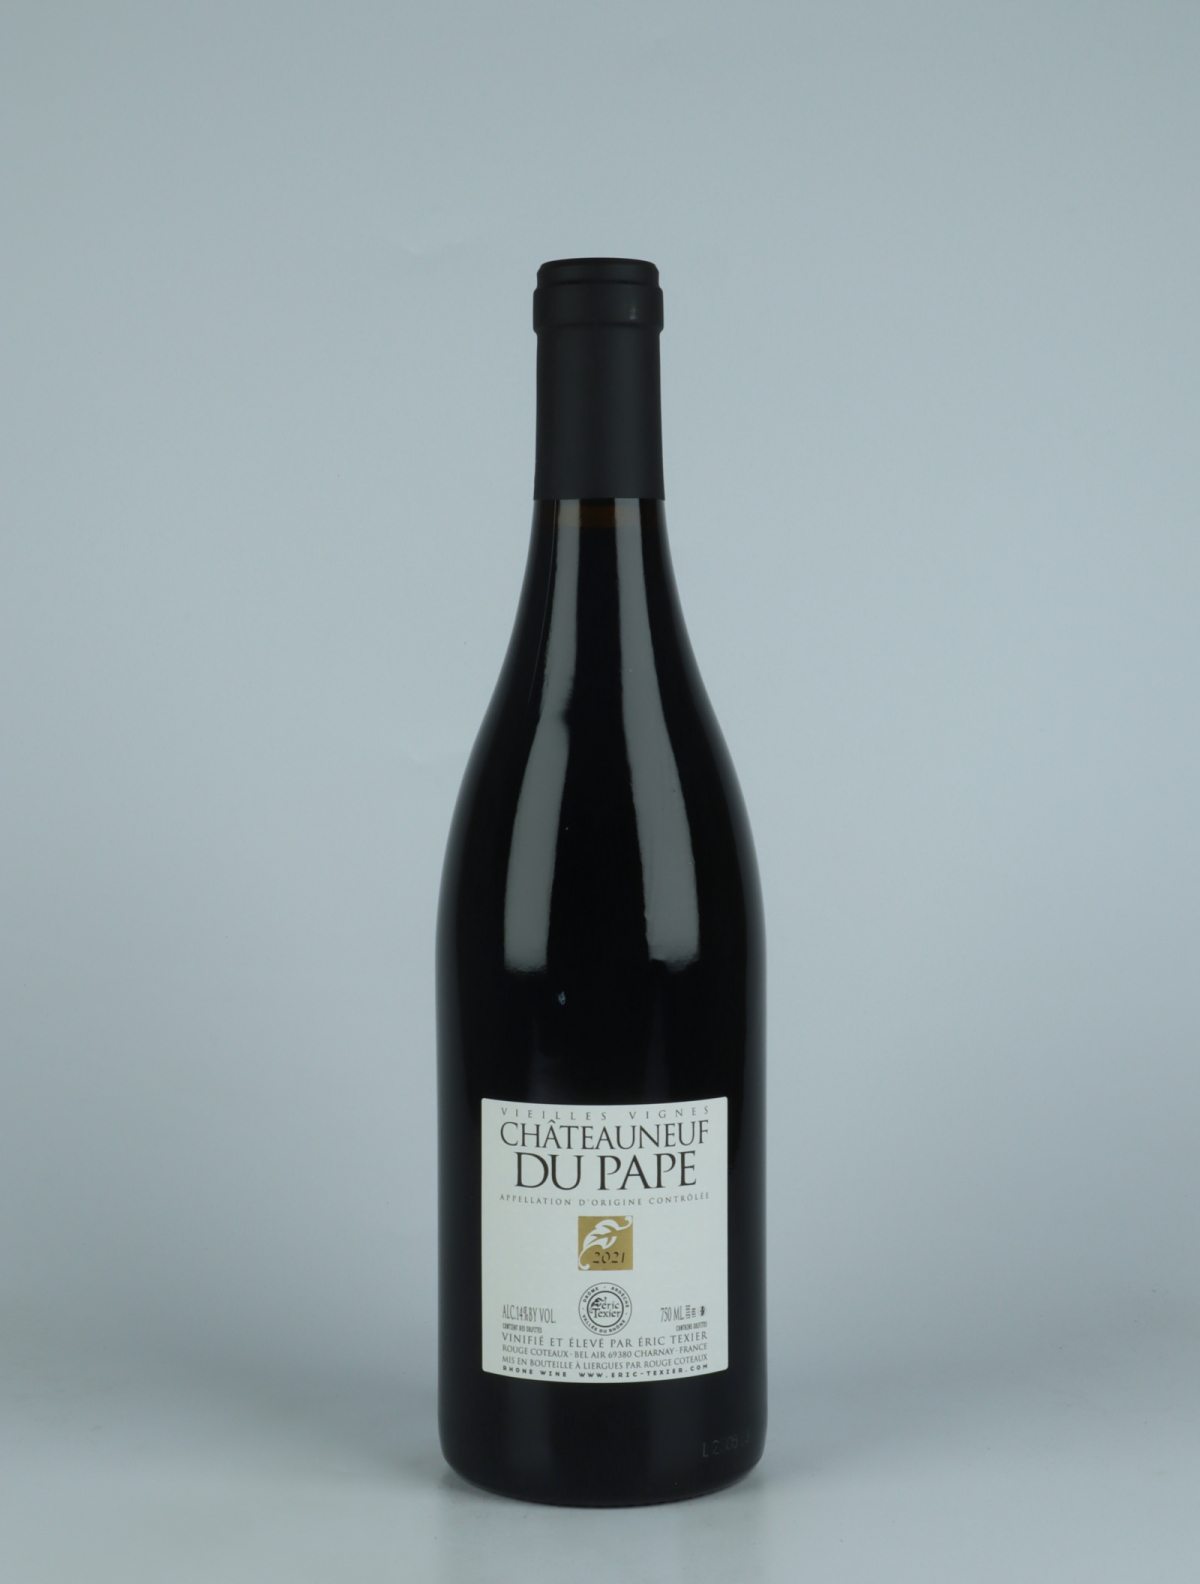 A bottle 2021 Châteauneuf-du-pape V.V. Red wine from Eric Texier, Rhône in France